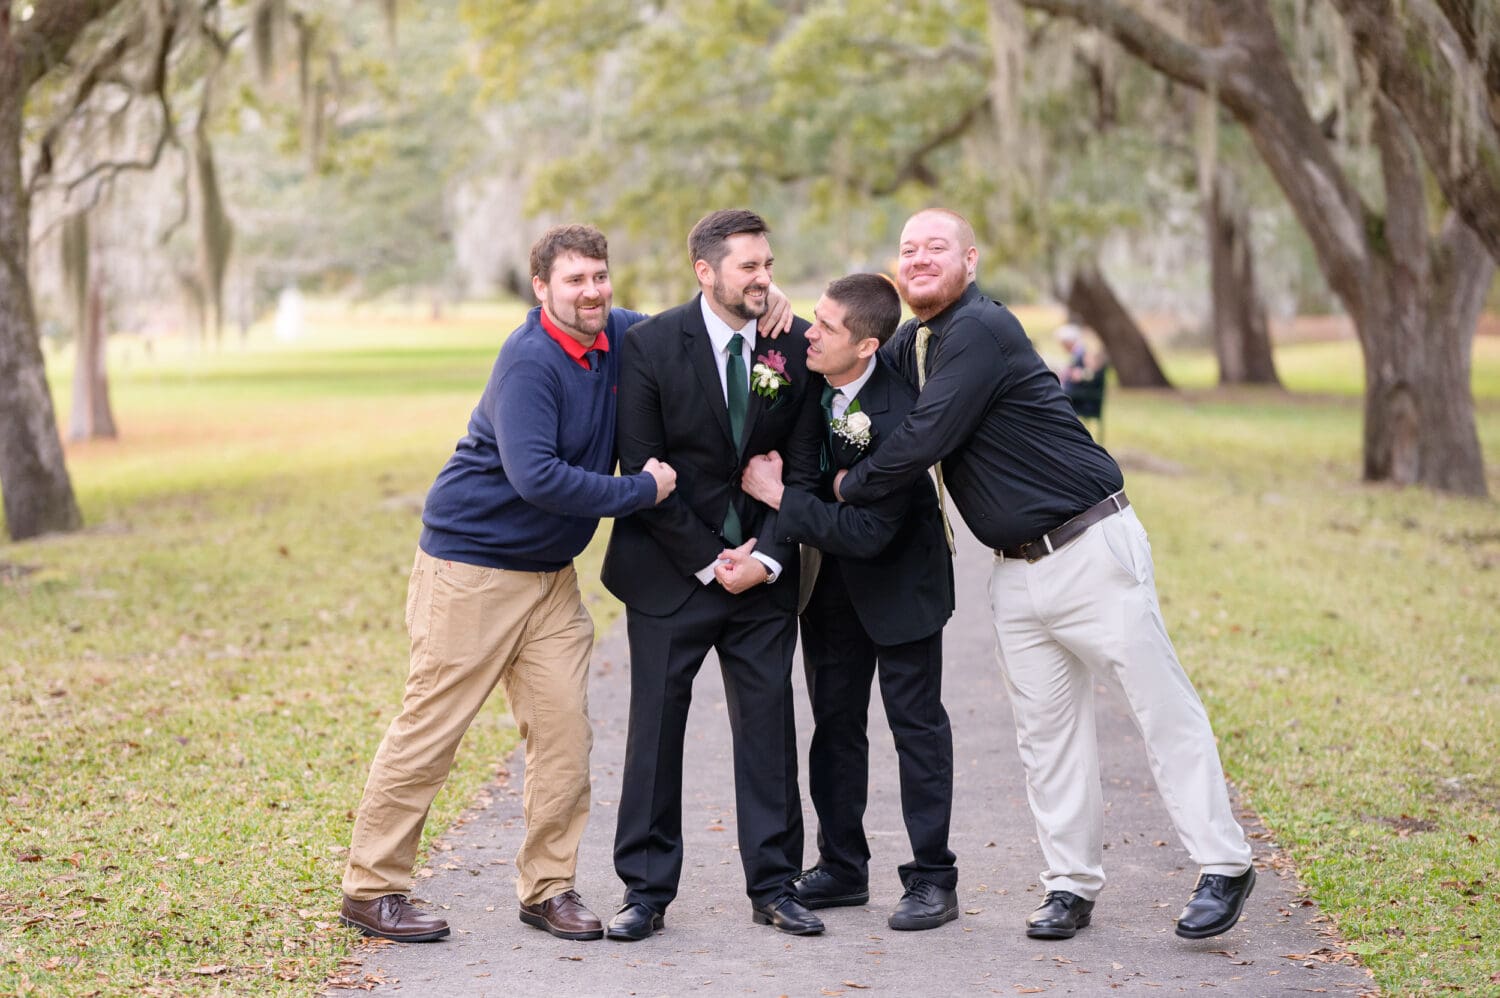 Groom with his best friends from growing up - Brookgreen Gardens